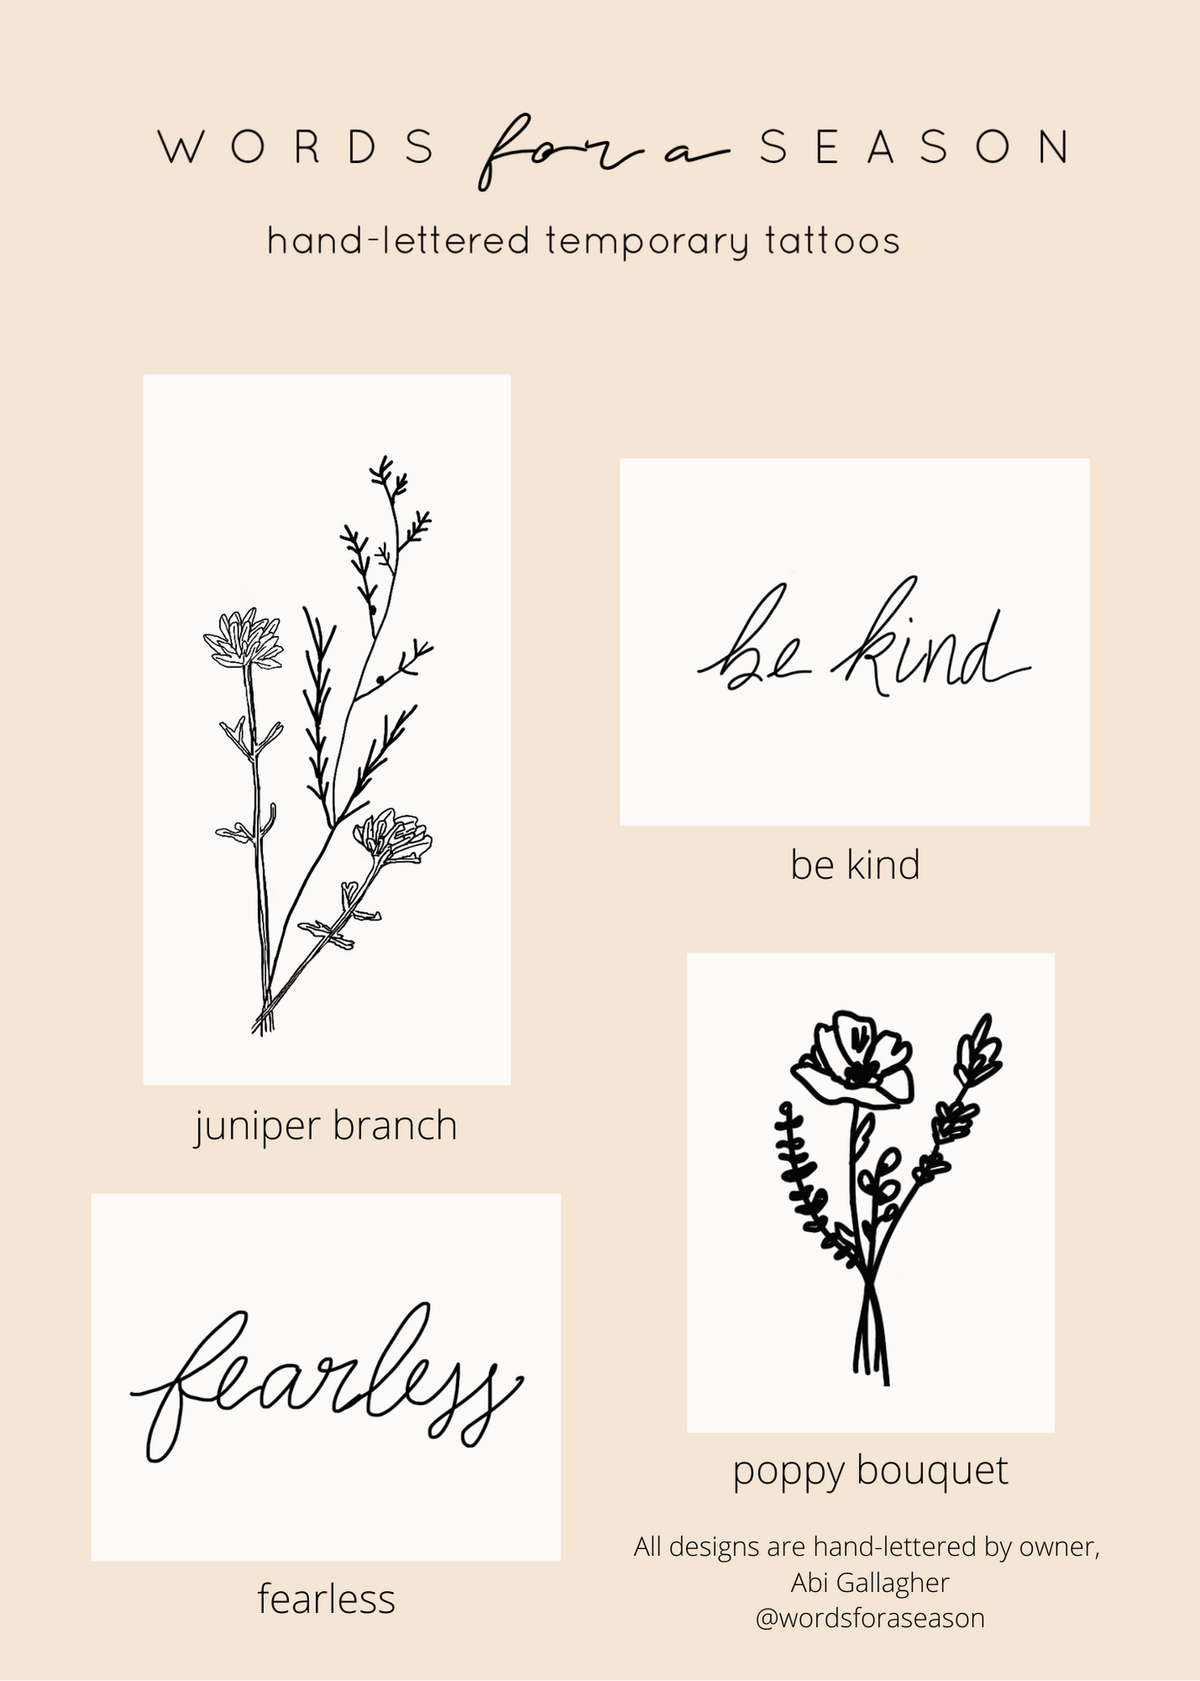 Experience the power of Words for a Season with our 4-pack Empower temporary tattoos. Each one features a unique hand-drawn design by our owner, Abi Gallagher. Adorn yourself with "be kind" and "fearless" or mix and match with floral patterns for an inspiring look. This multi-pack makes the perfect gift for a friend or daughter who needs a boost of encouragement. Made in the USA.